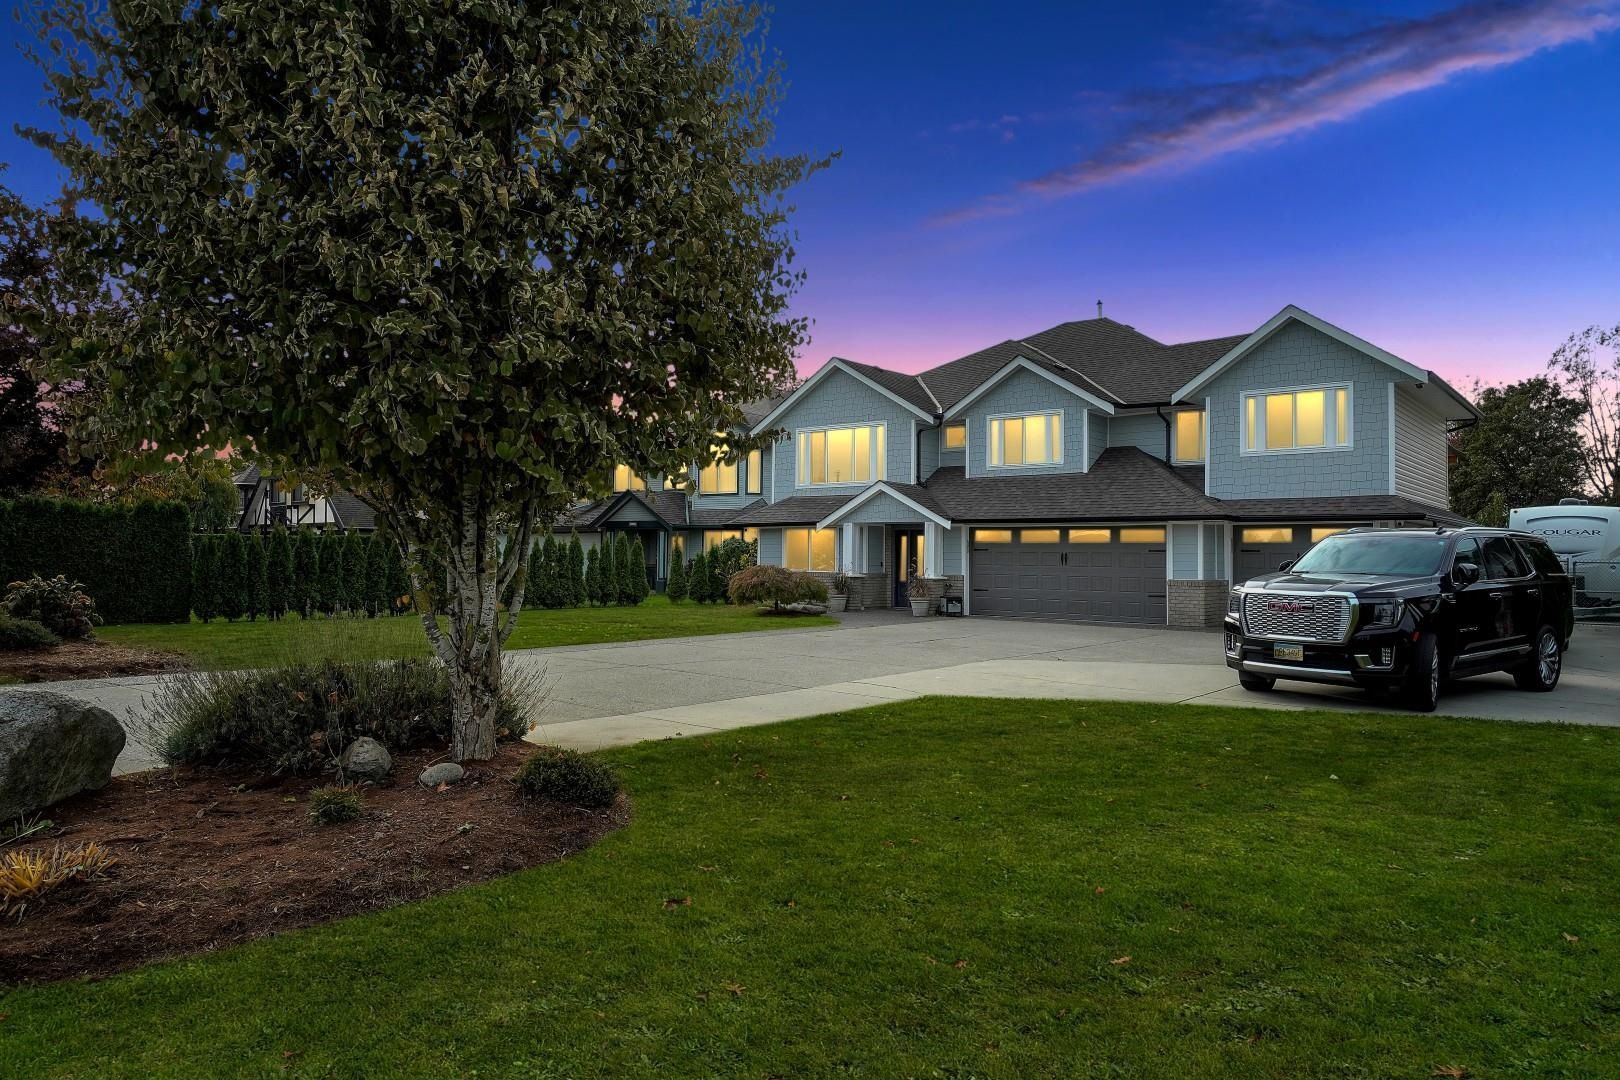 New property listed in West Meadows, Pitt Meadows